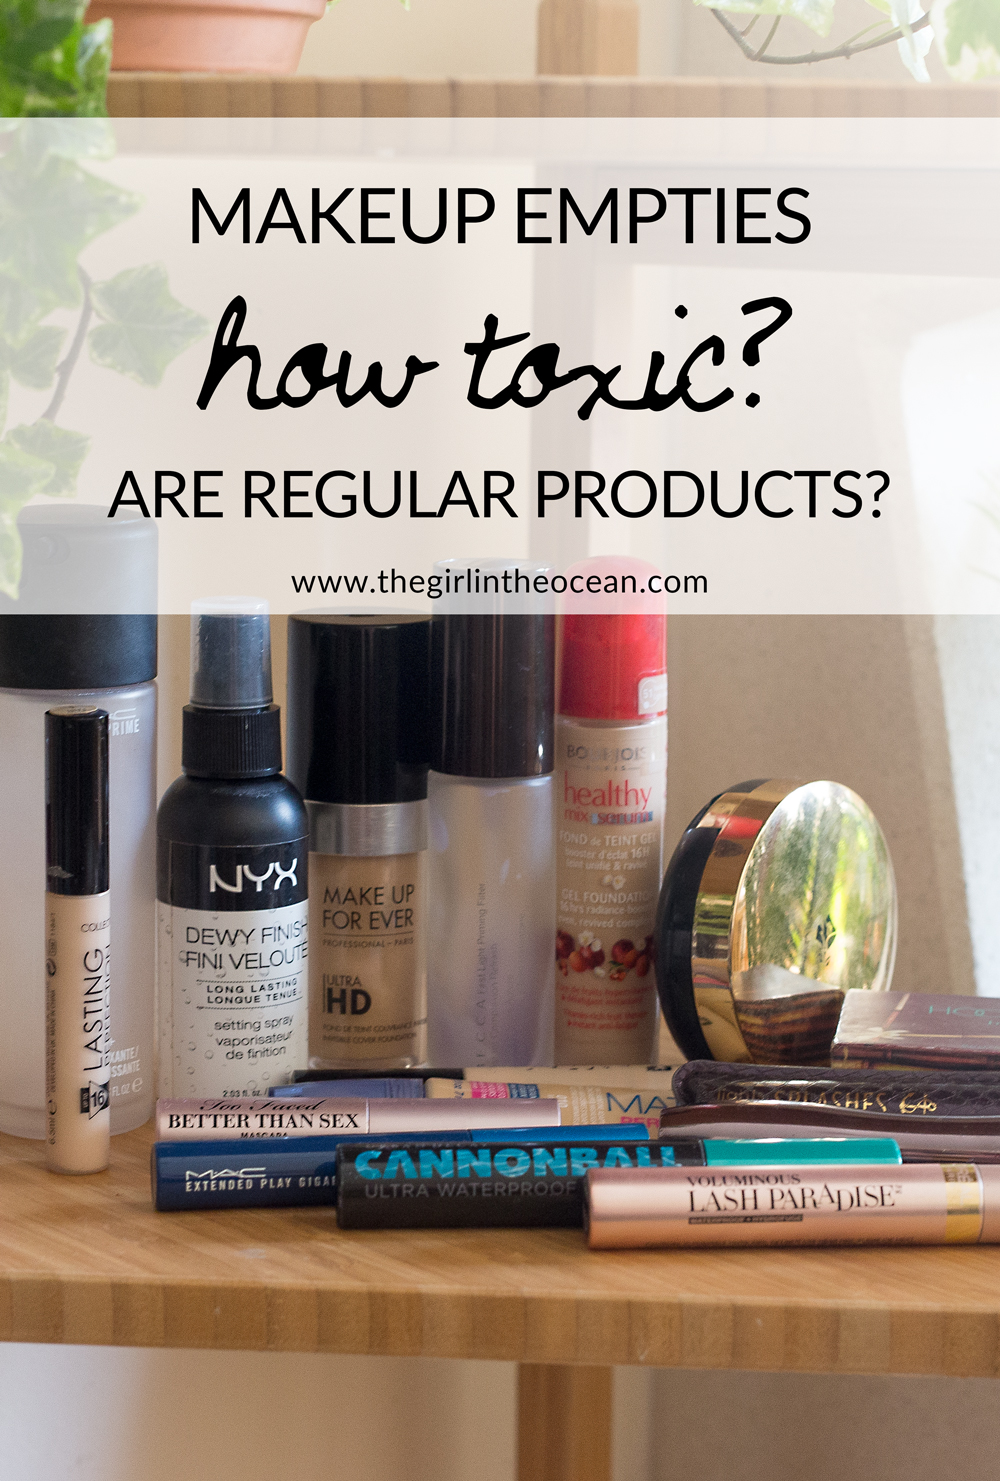 Beauty Empties – How Toxic are Regular Products? – August 2018